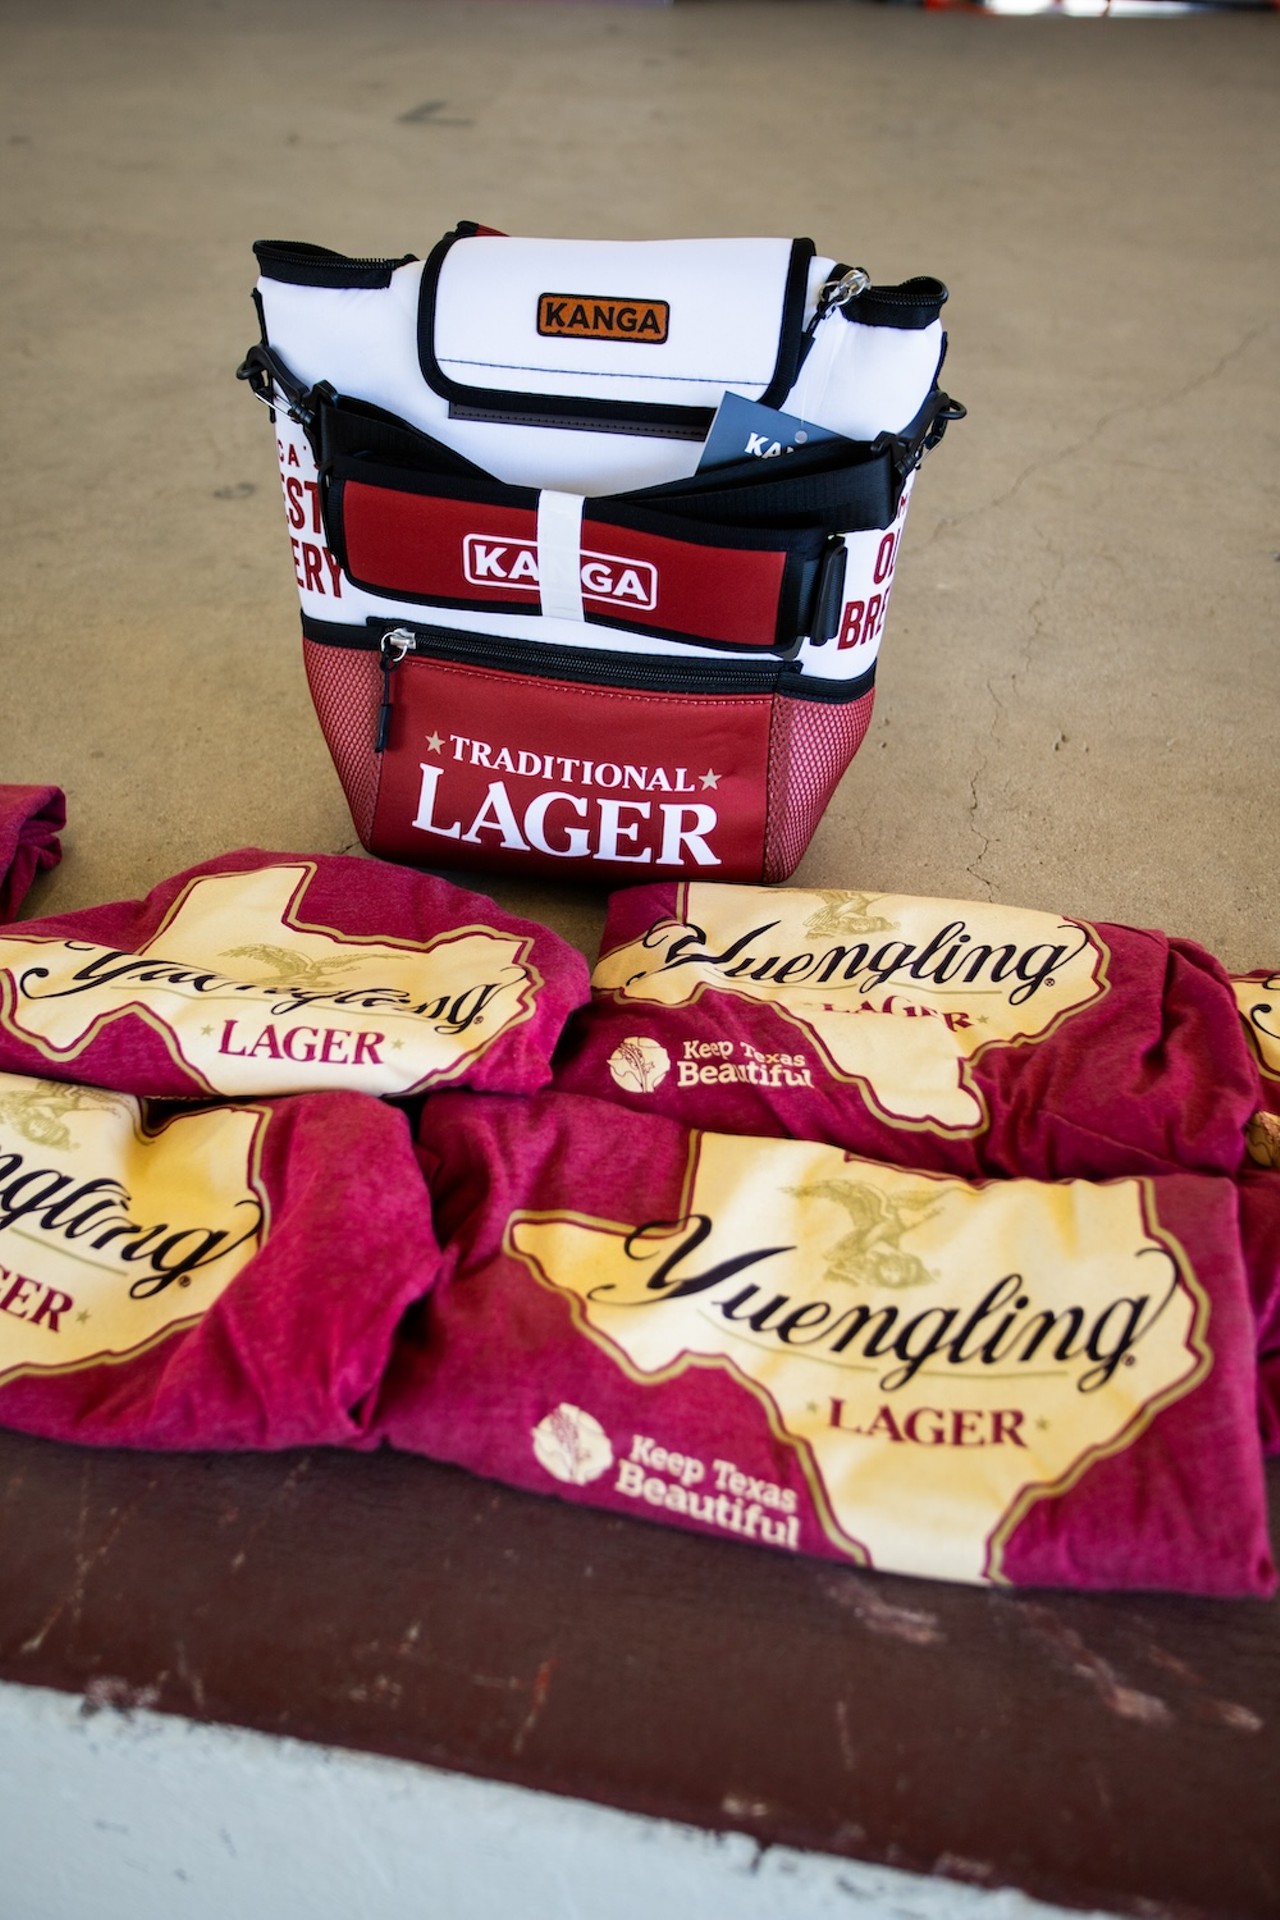 Yuengling Texas Clean Up Beautification Day